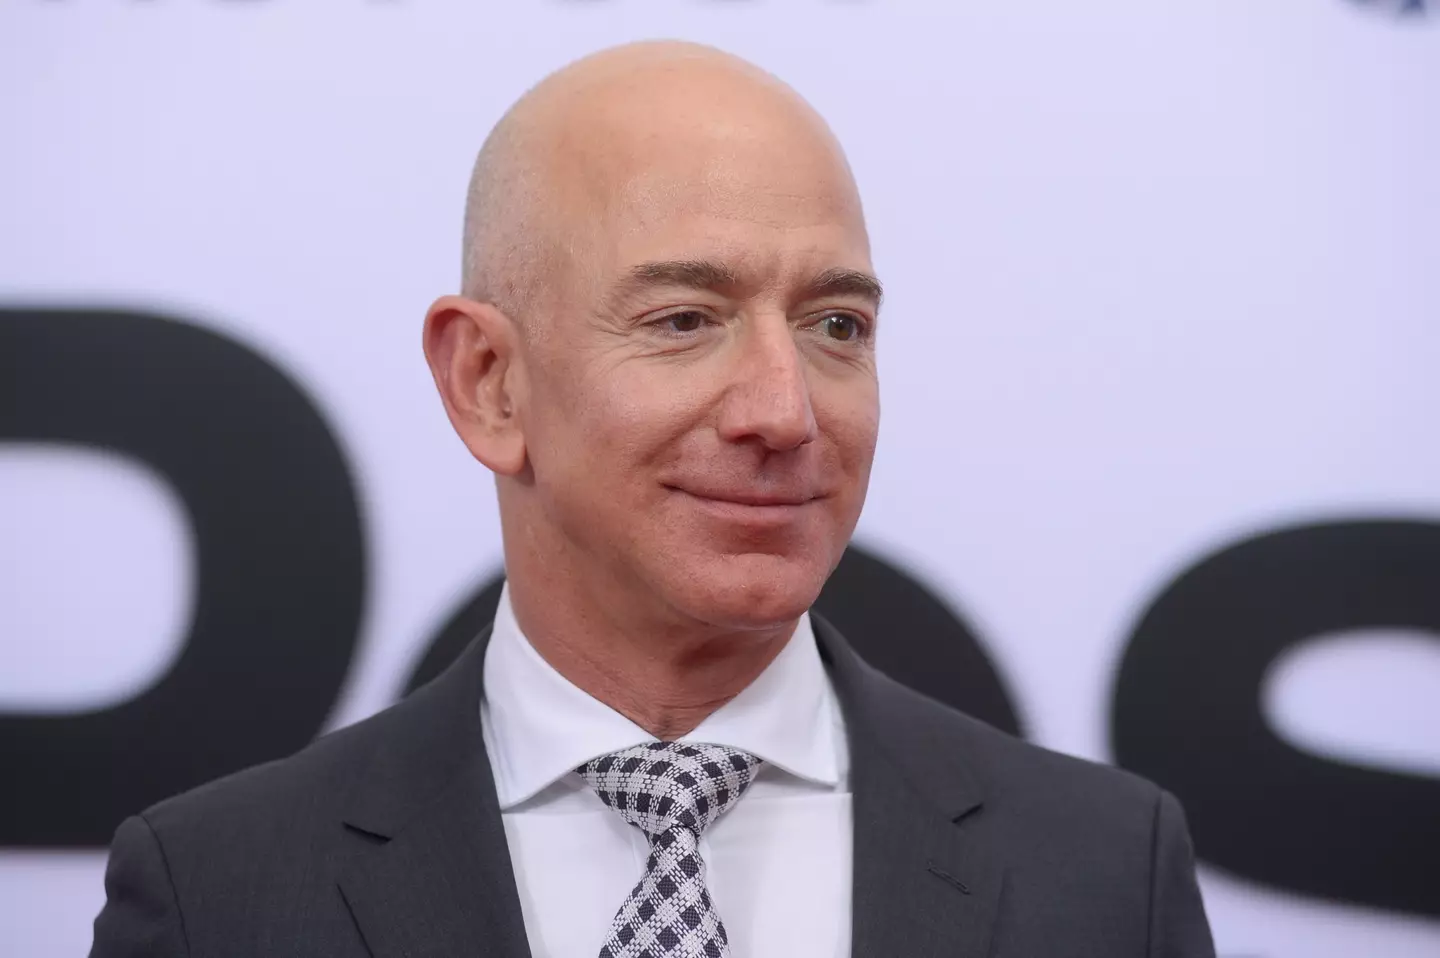 Jeff Bezos' camp have dismissed the claims.